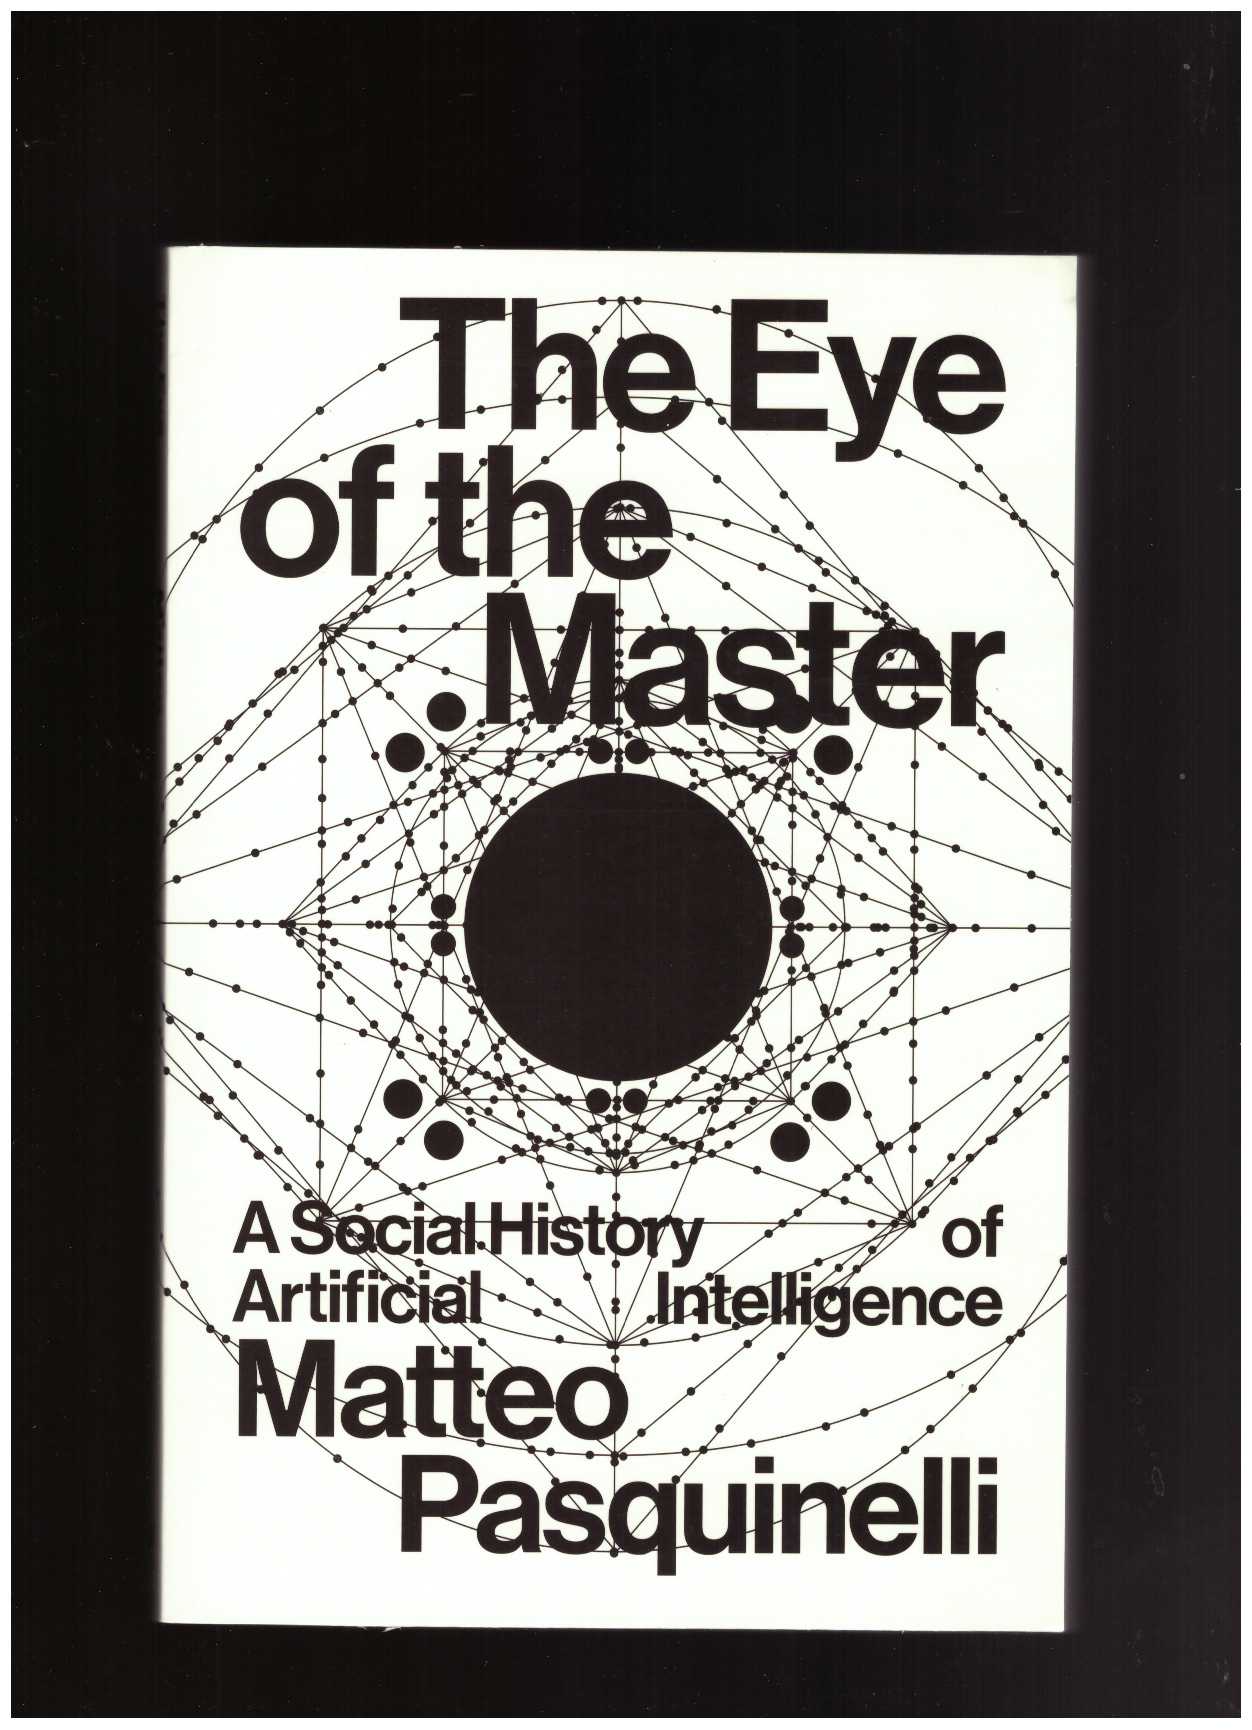 PASQUINELLI, Matteo - The Eye of the Master: A Social History of Artificial Intelligence